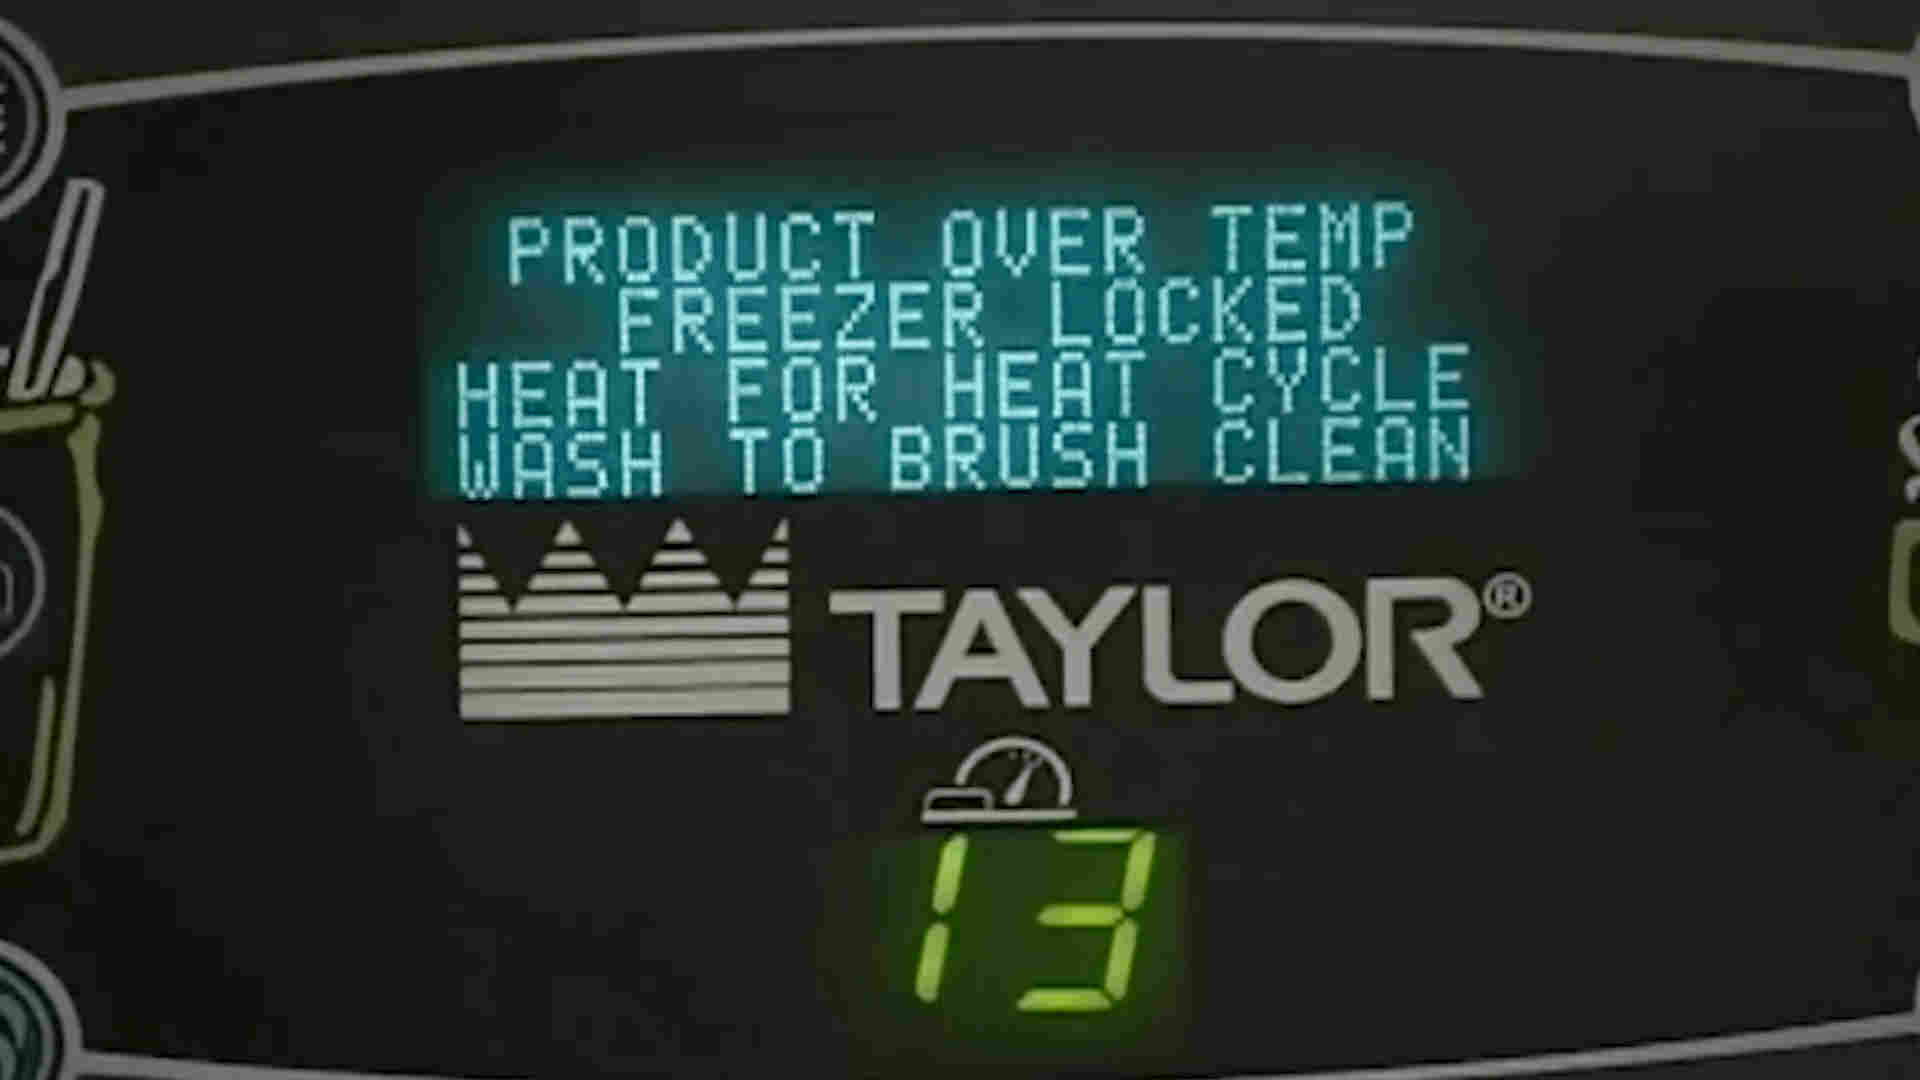 Broken Mcdonald'S Ice Cream Machine Codes - Digital Display On A Taylor Freezer, Used In Mcdonald'S Ice Cream Machines, Indicating An Over-Temperature Condition And Providing Instructions For A Heat Cycle And Cleaning.